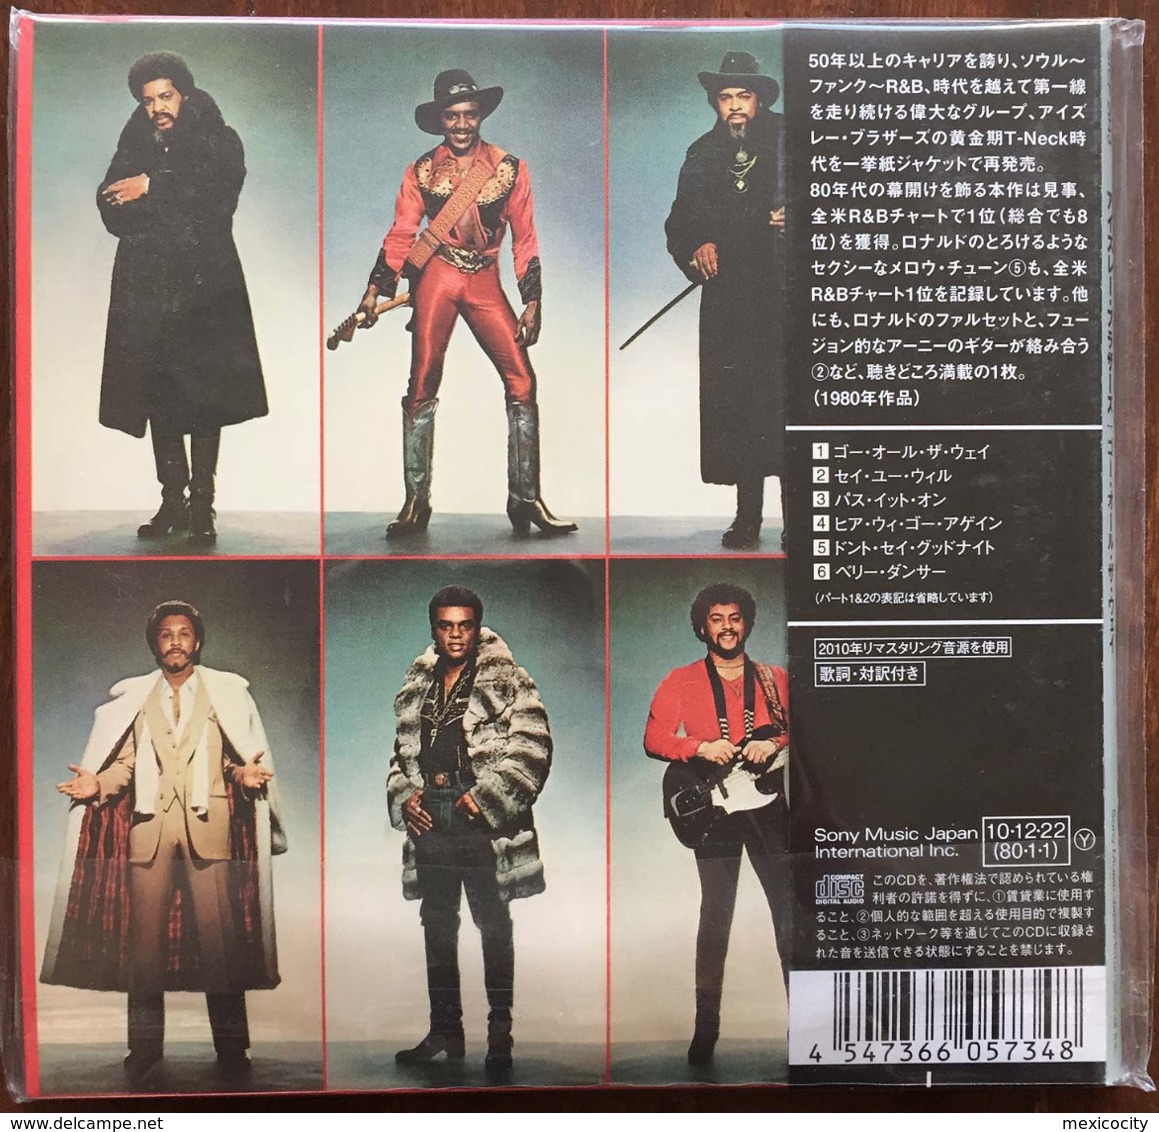 THE ISLEY BROTHERS GO ALL THE WAY Japanese CD Mini Sleeve W/ Inserts Sony Japan See Imgs. SICP-2943 Rare - Soul - R&B